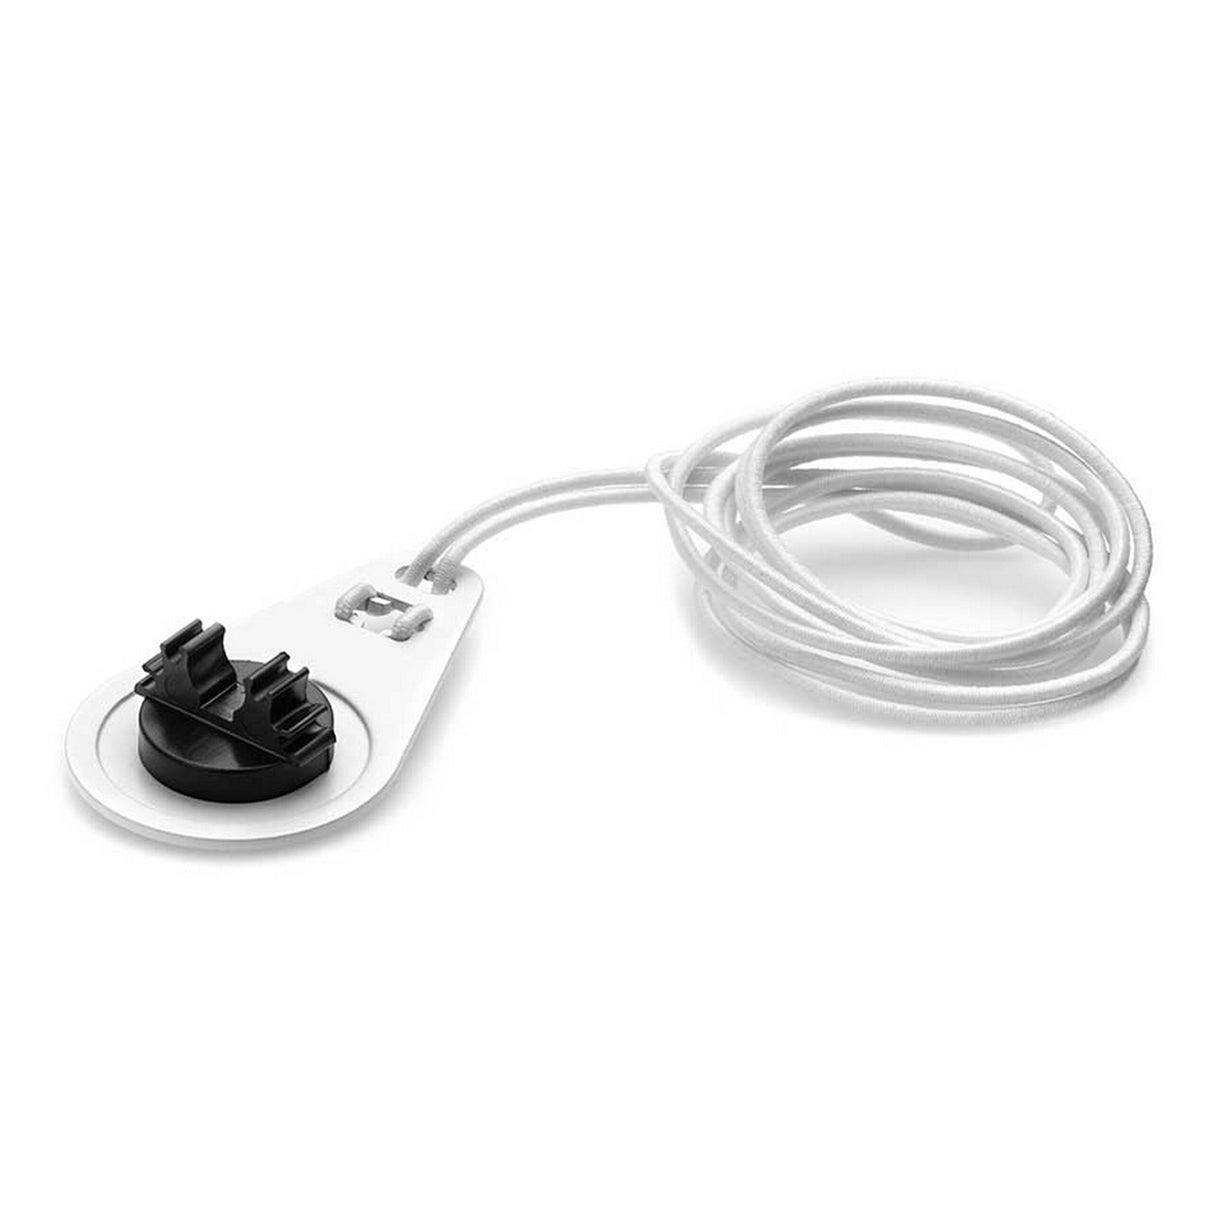 DPA DMM0003-B Magnetic Lavalier Microphone Holder